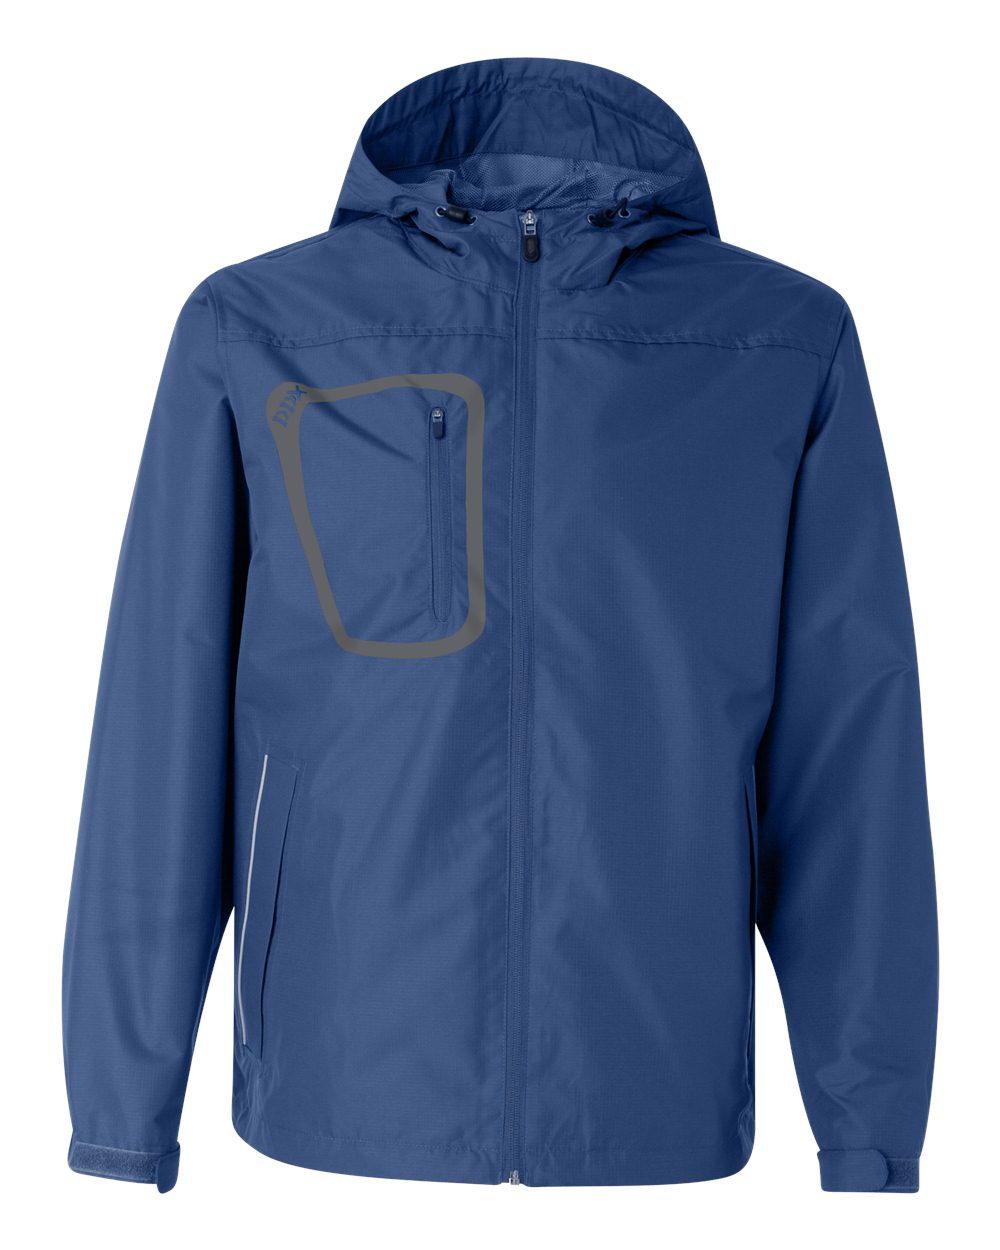 Shell Pacific Trail Outdoor Wear Jackets - from $5.03